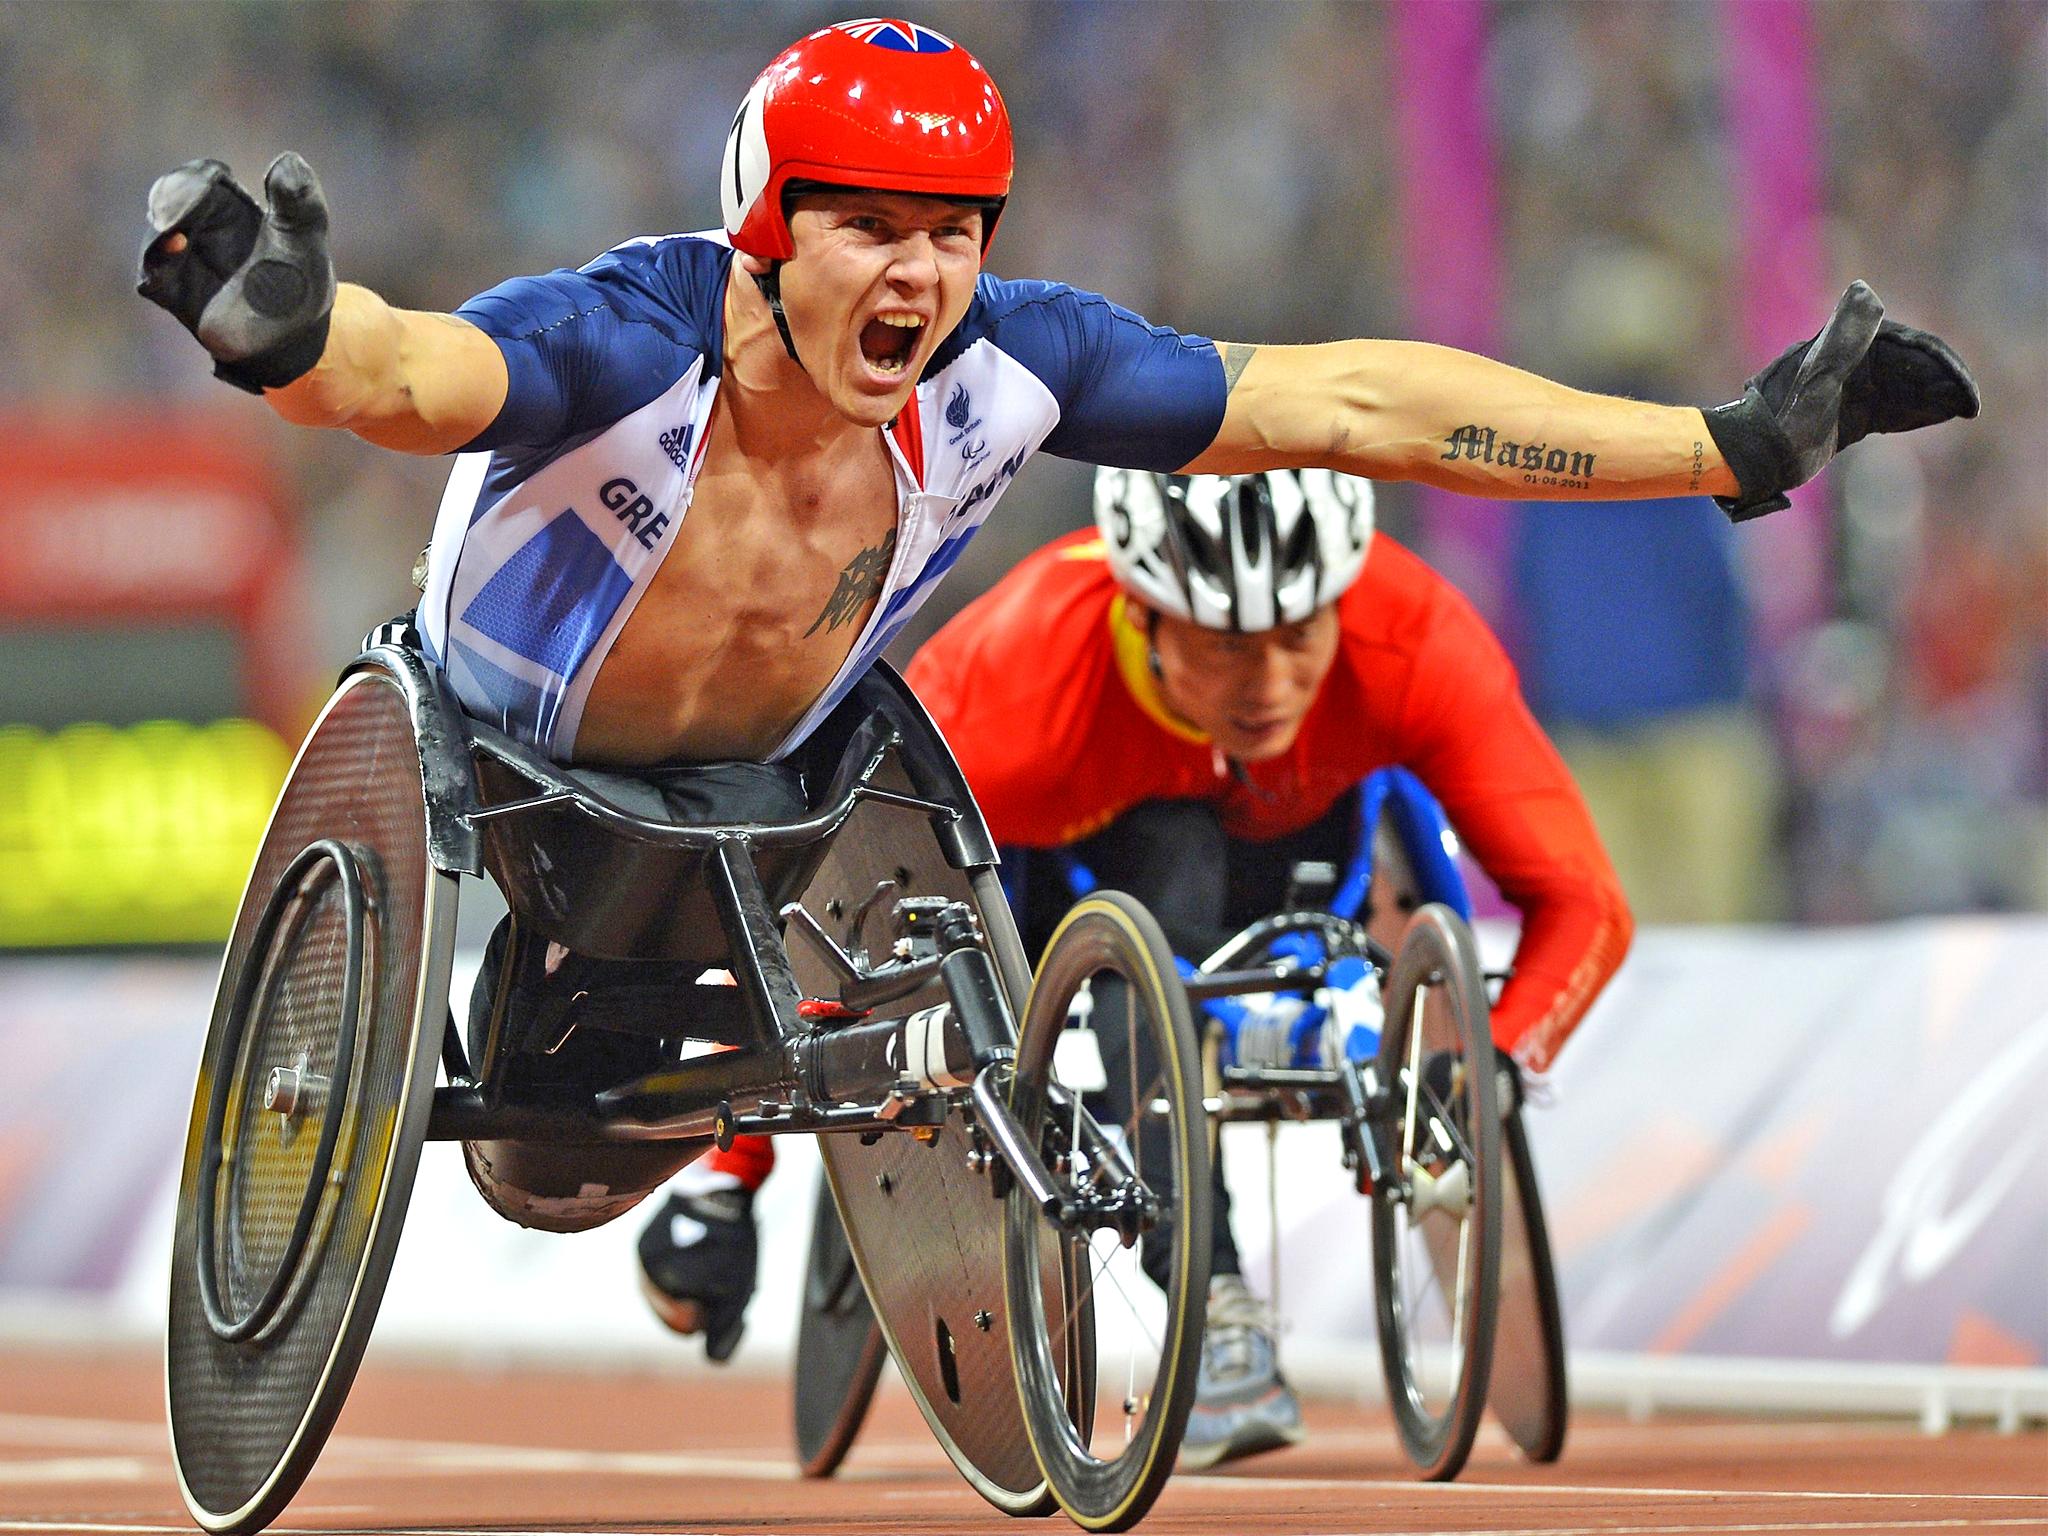 David Weir was acclaimed after winning four golds in 2012 but the Paralympics need to run alongside the able-bodied Games